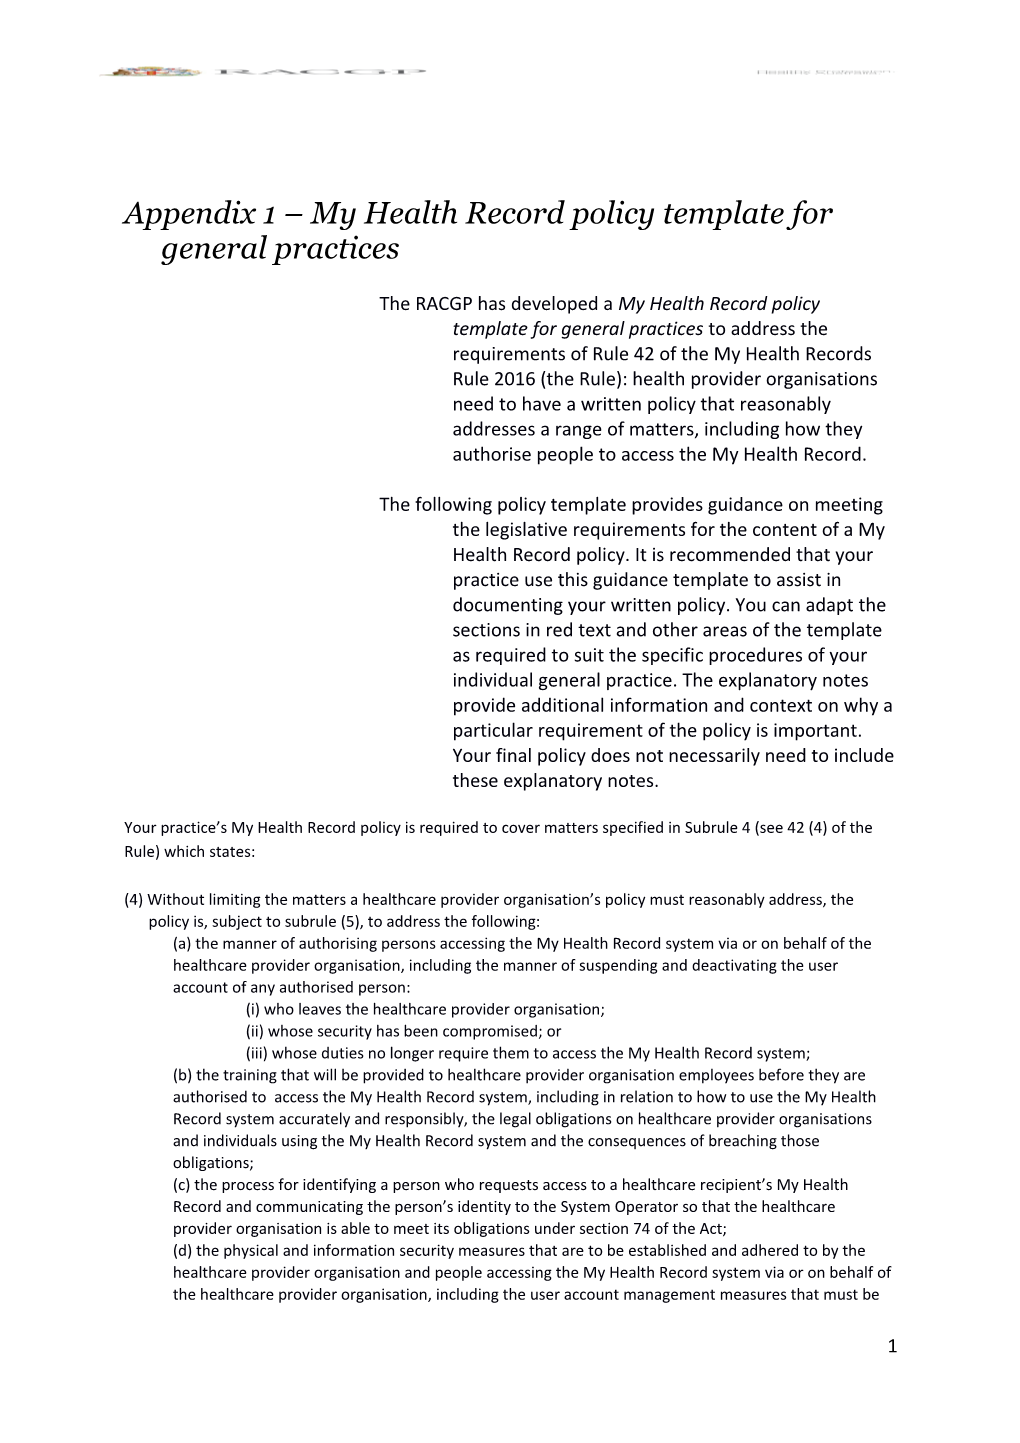 Appendix 1 My Health Record Policy Template for General Practices